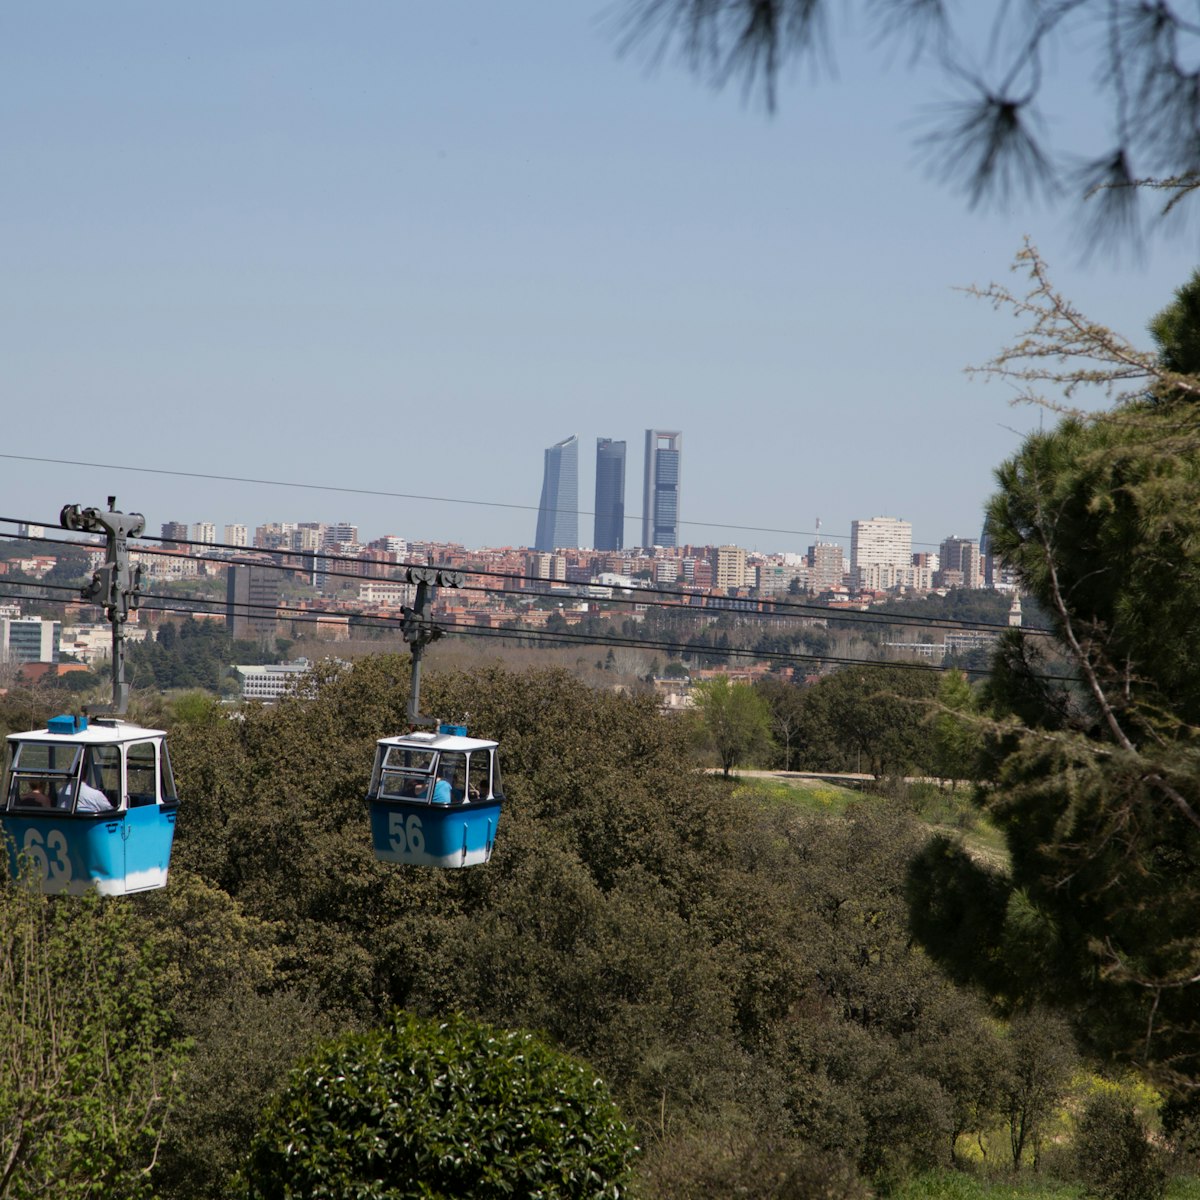 Madrid cable car